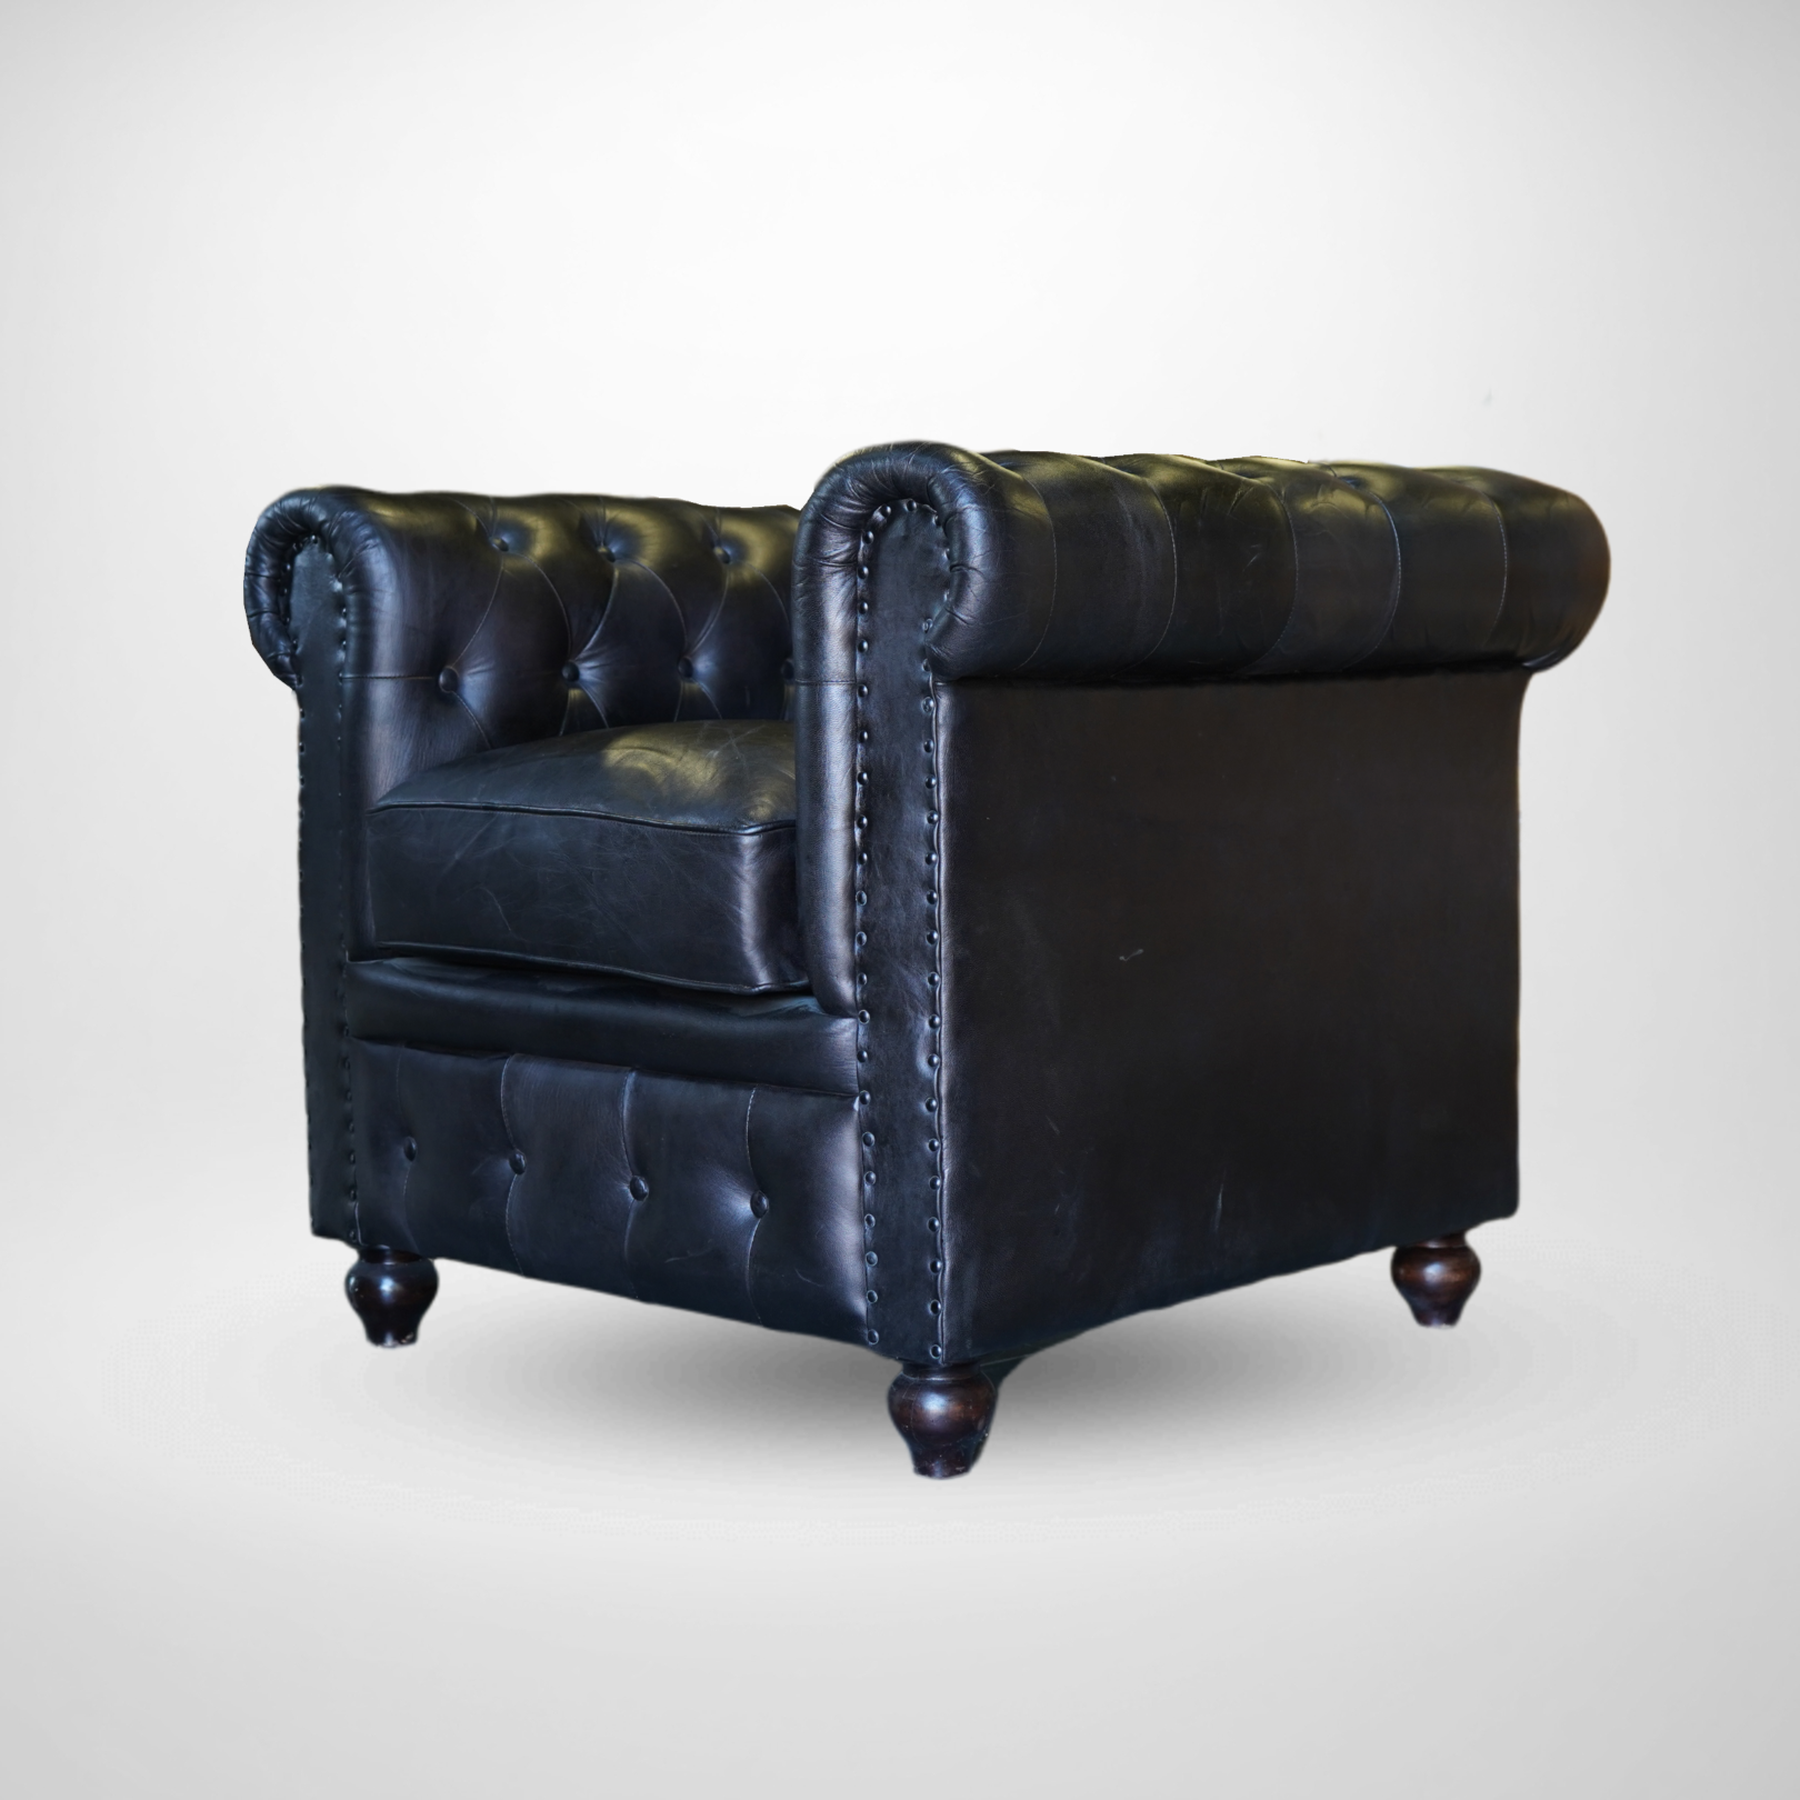 Leather Accent Chair | Chesterfield Armchair with Wooden legs | Upholstered One Seat | 35x40x30 inches